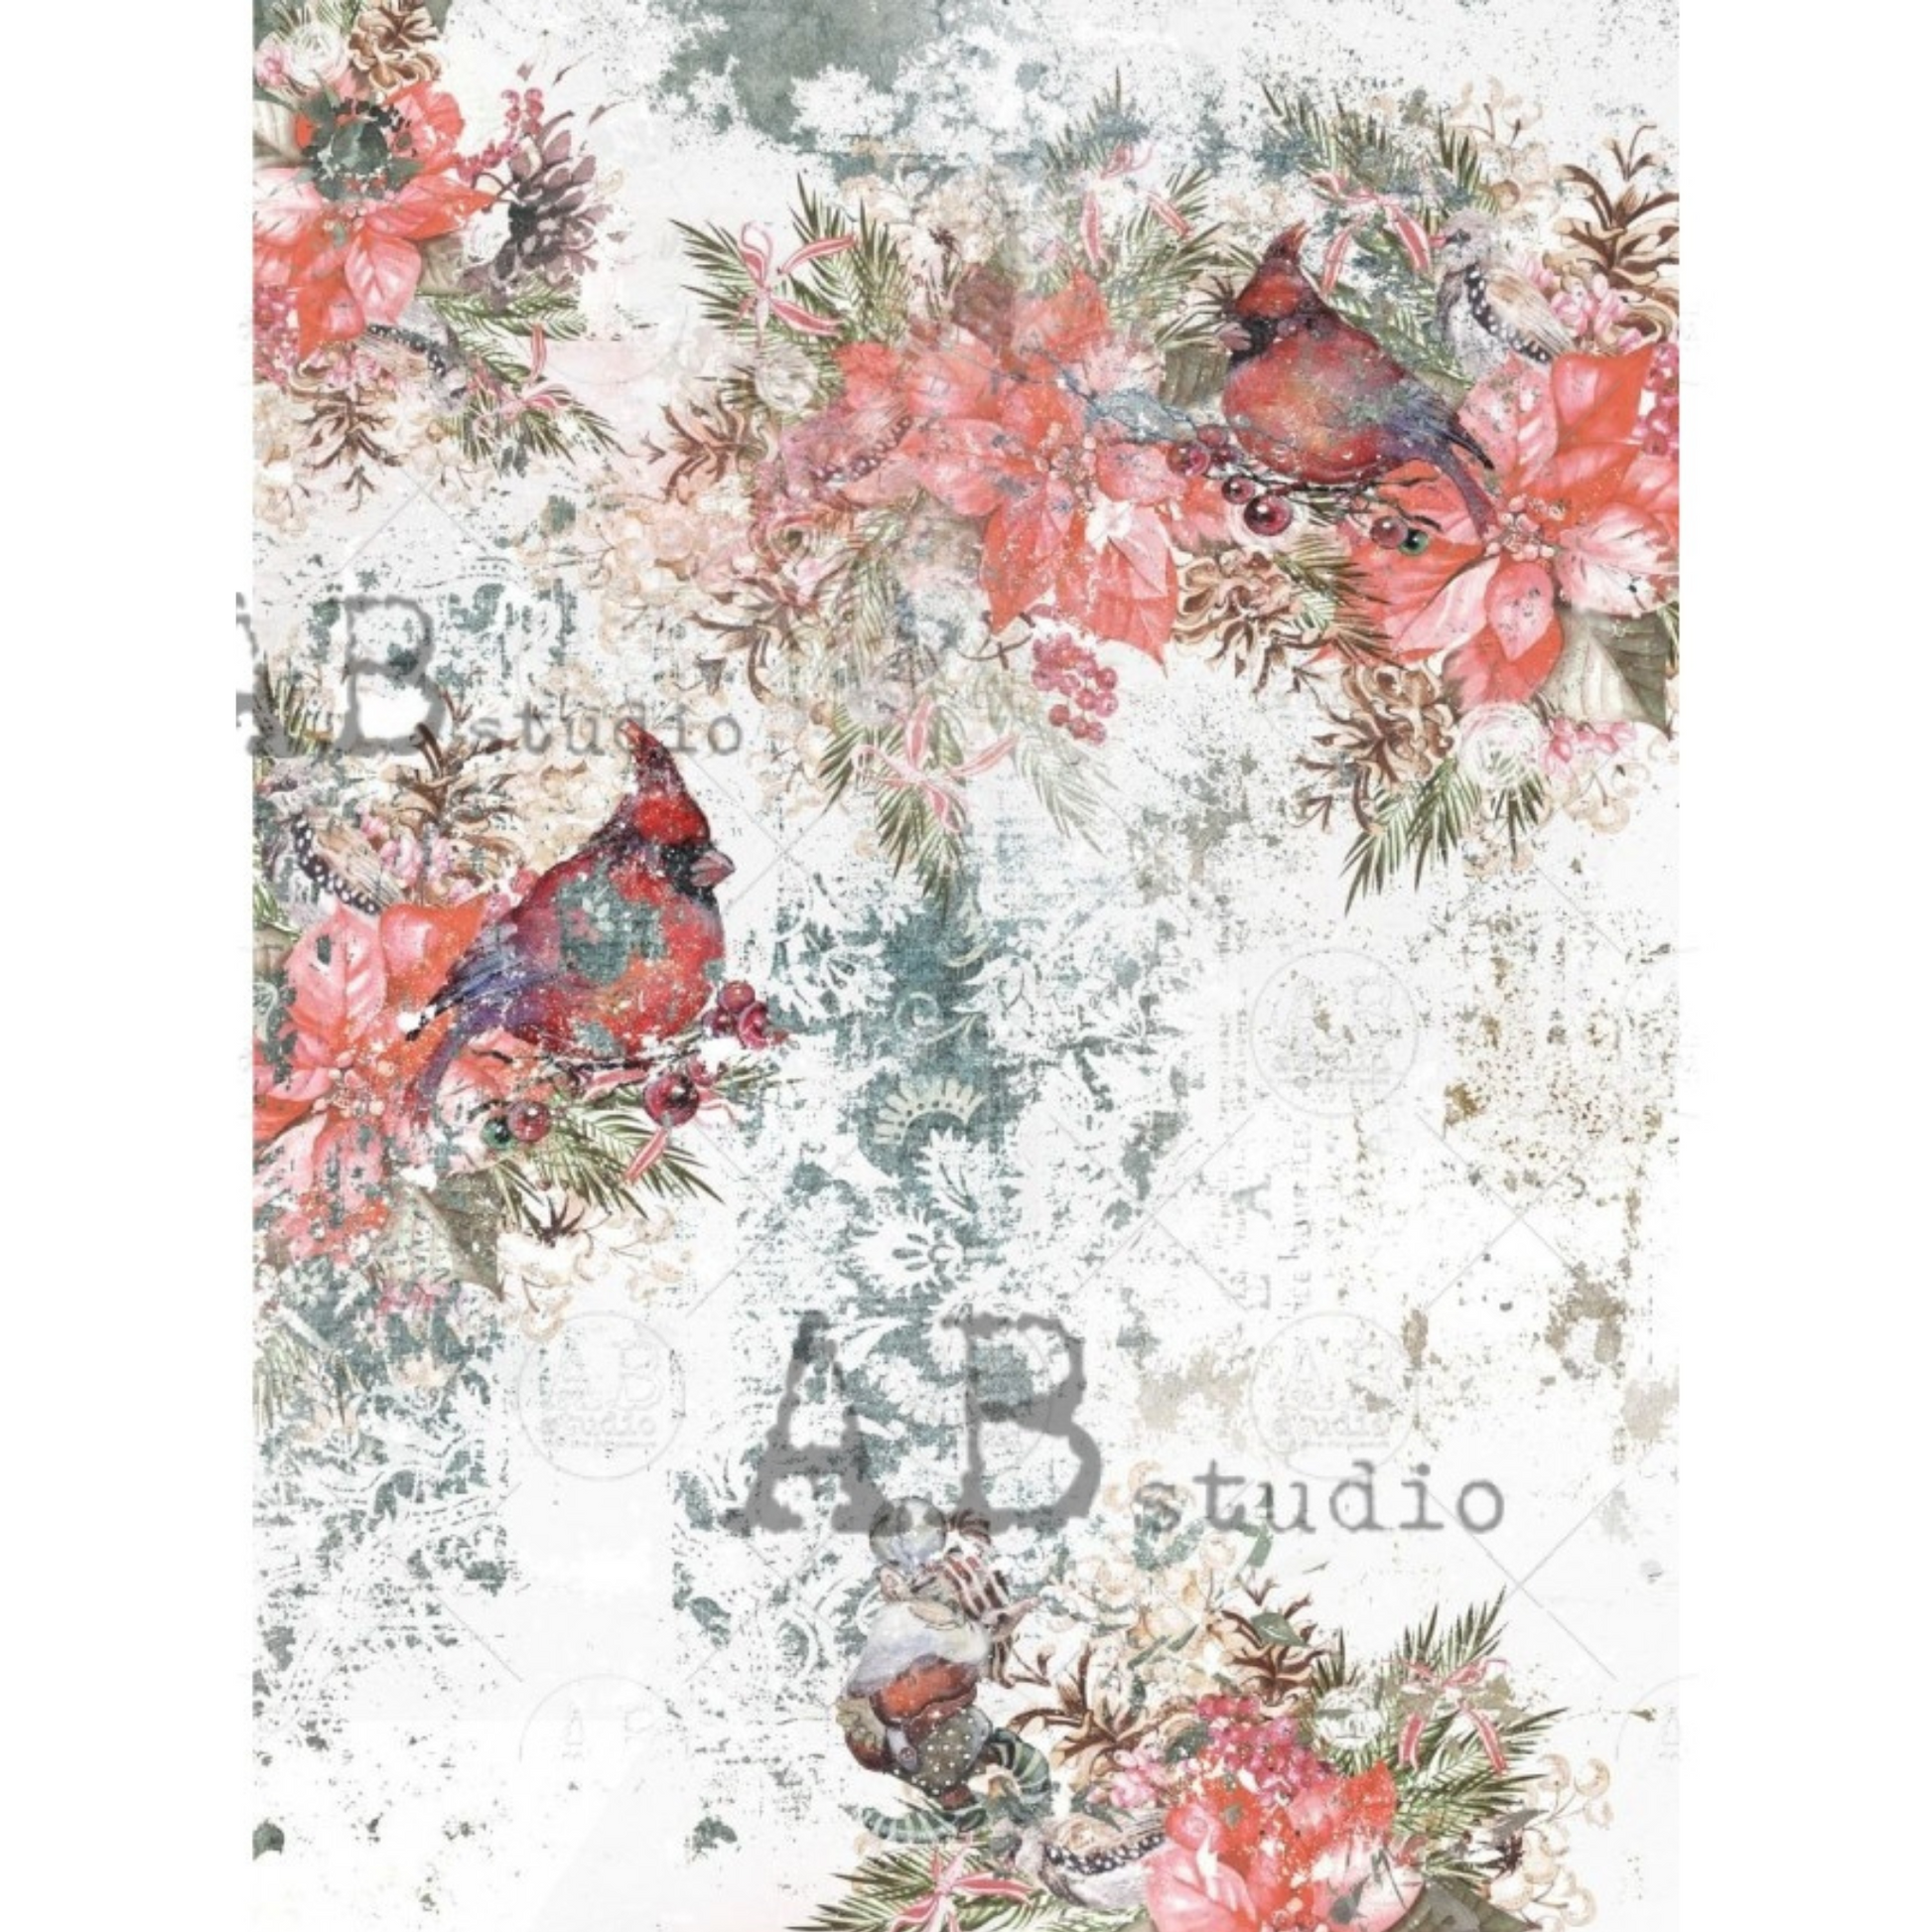 Textured Winter Cardinals - Decoupage rice paper by AB Studio. Available at Milton's Daughter.